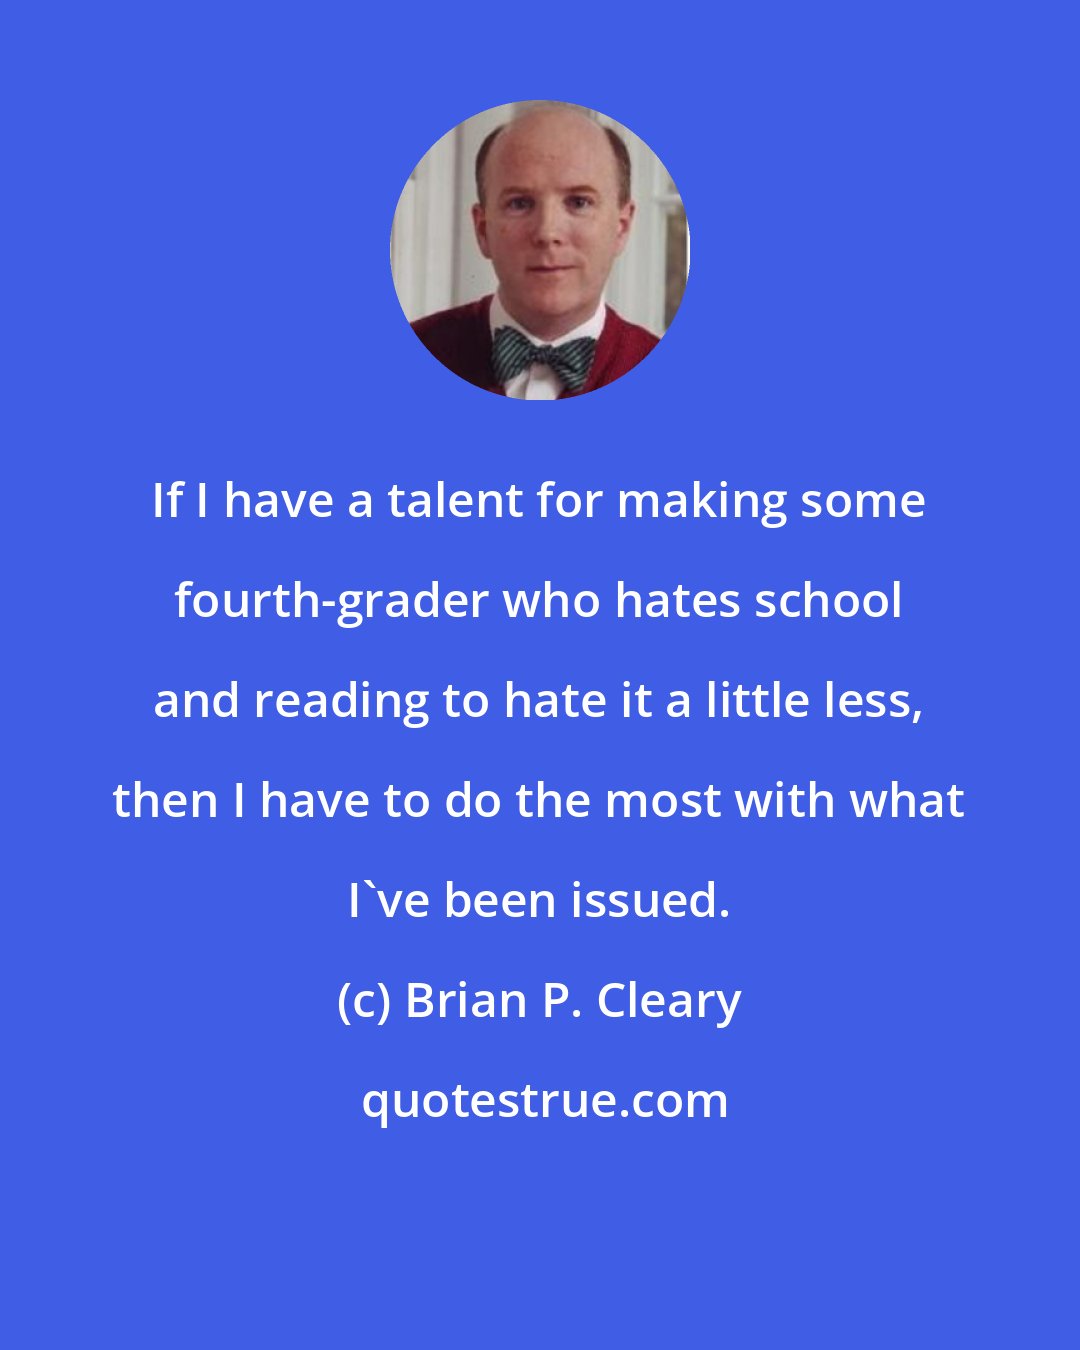 Brian P. Cleary: If I have a talent for making some fourth-grader who hates school and reading to hate it a little less, then I have to do the most with what I've been issued.